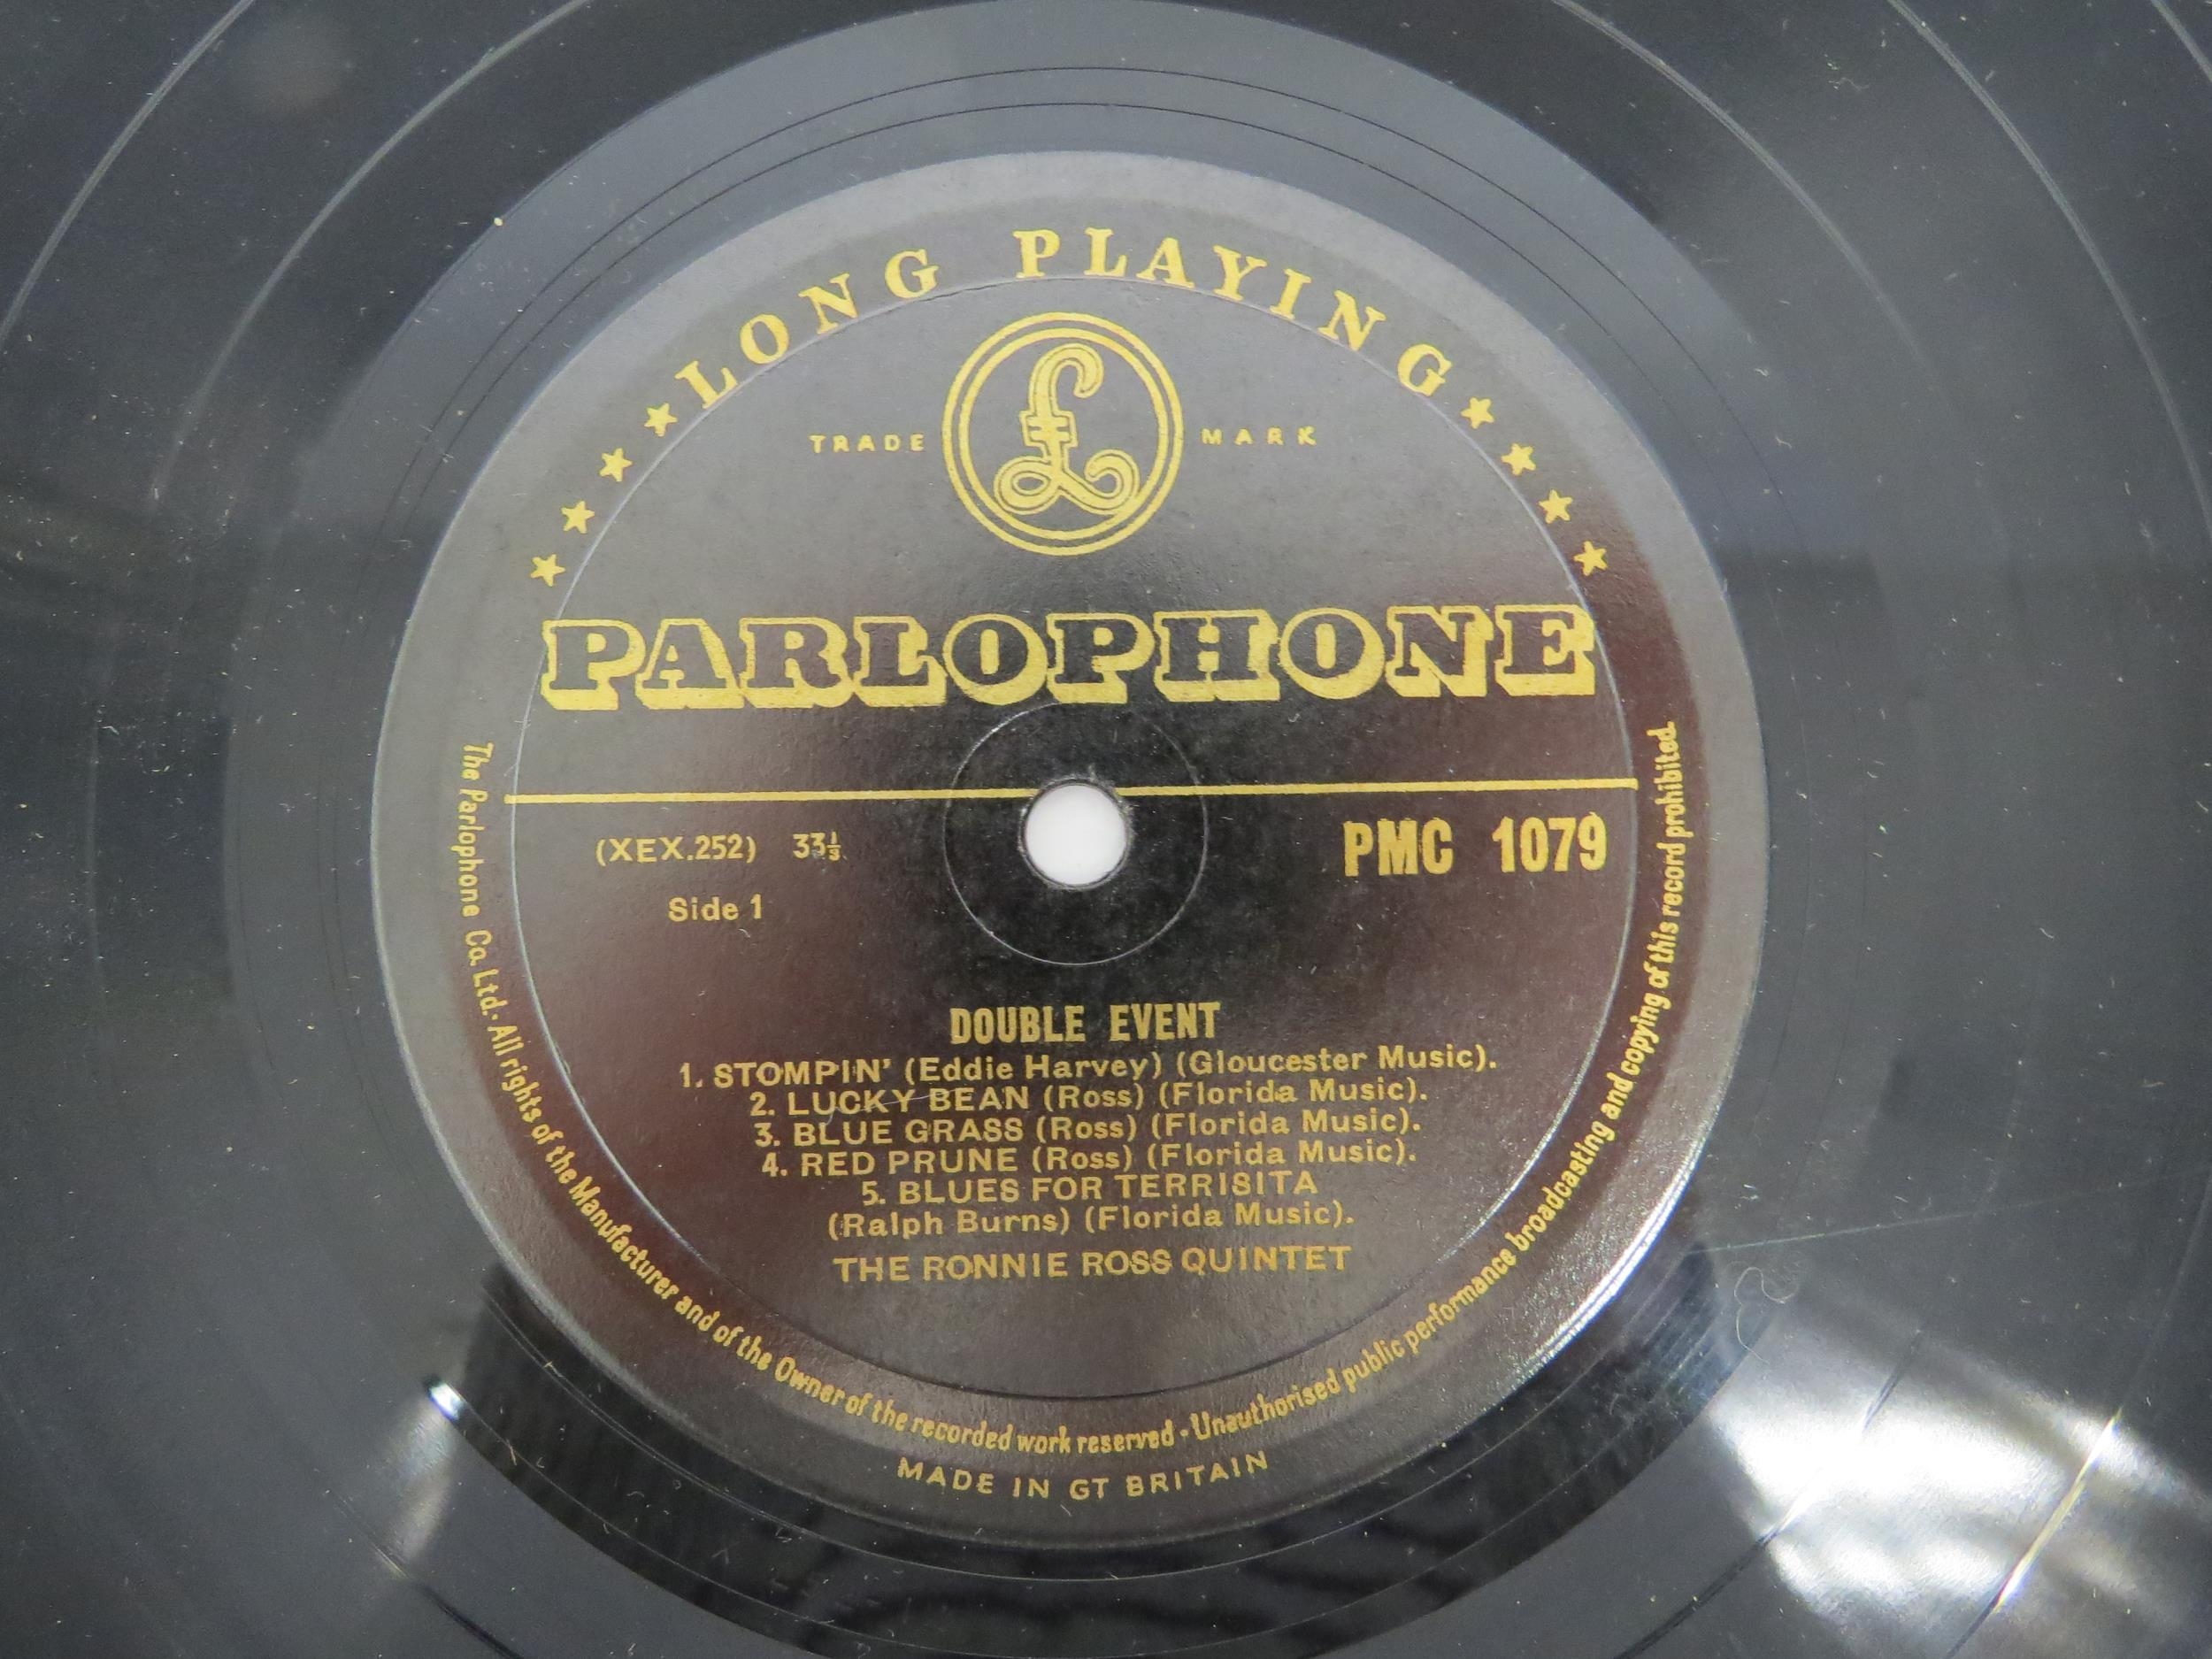 RONNIE ROSS: 'Double Event' Jazz LP, original 1959 UK release with Parlophone black and gold labels, - Image 2 of 2